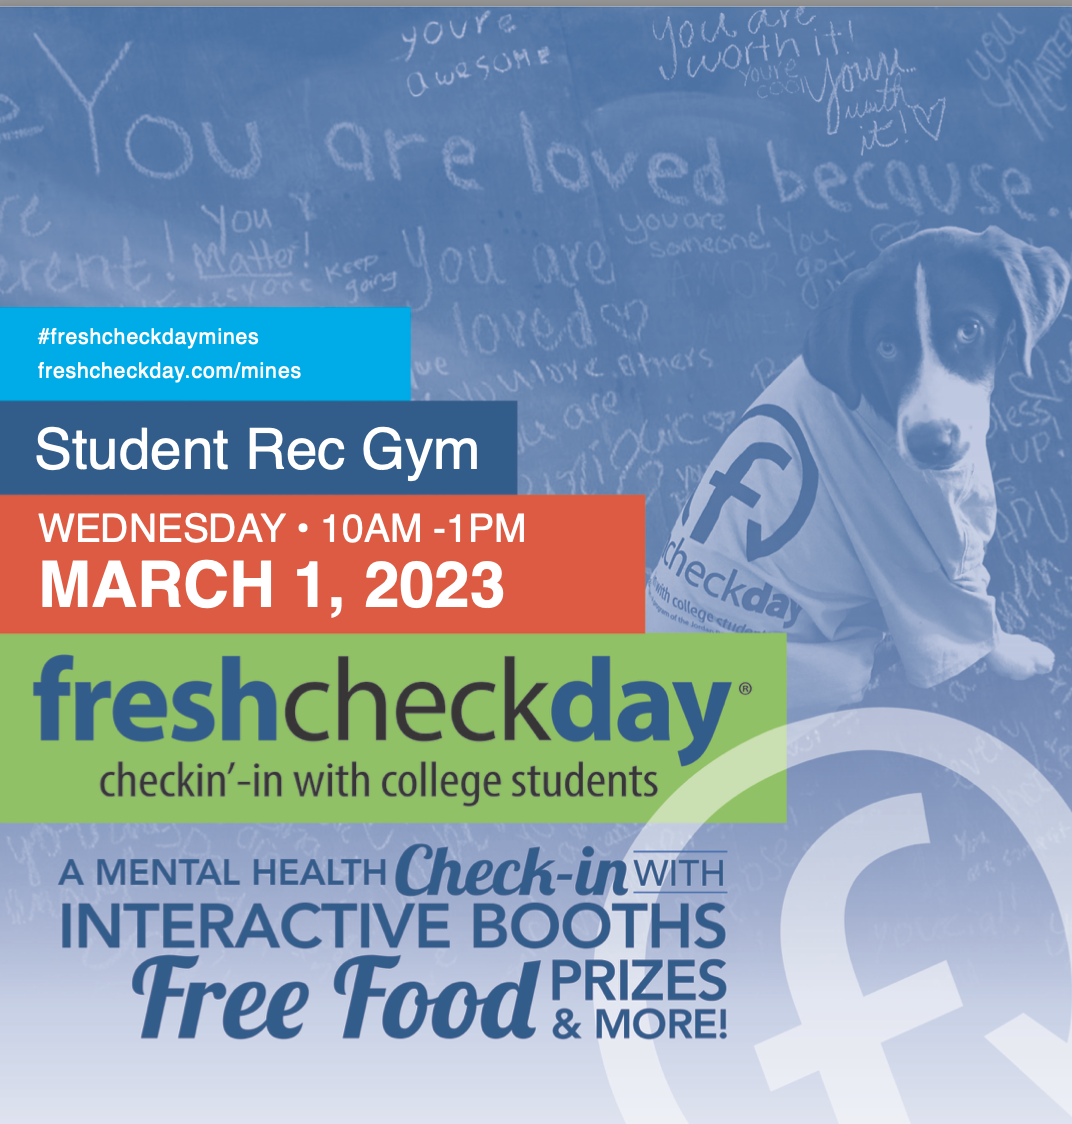 Fresh Check Day Flier. Event located in the Student Rec Gym on March 1, 2023. For more information visit: https://freshcheckday.com/schools/colorado-school-of-mines/